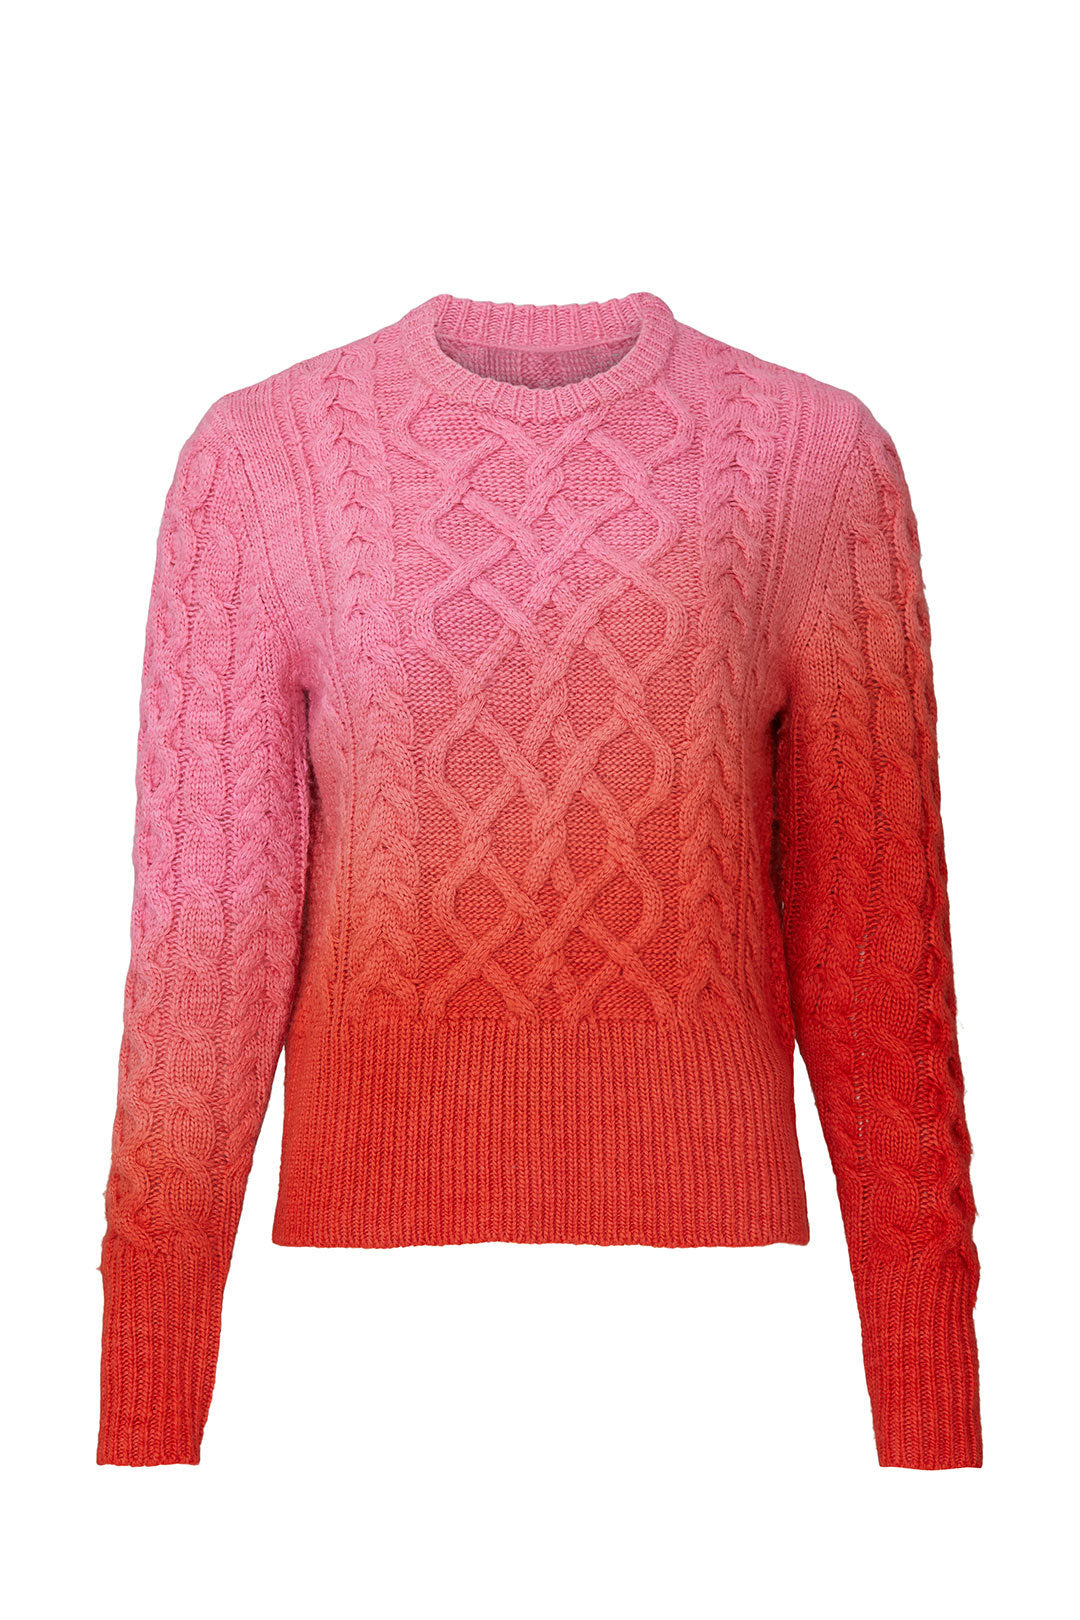 FRIDA PAINT SWEATER IN SEEING-RED